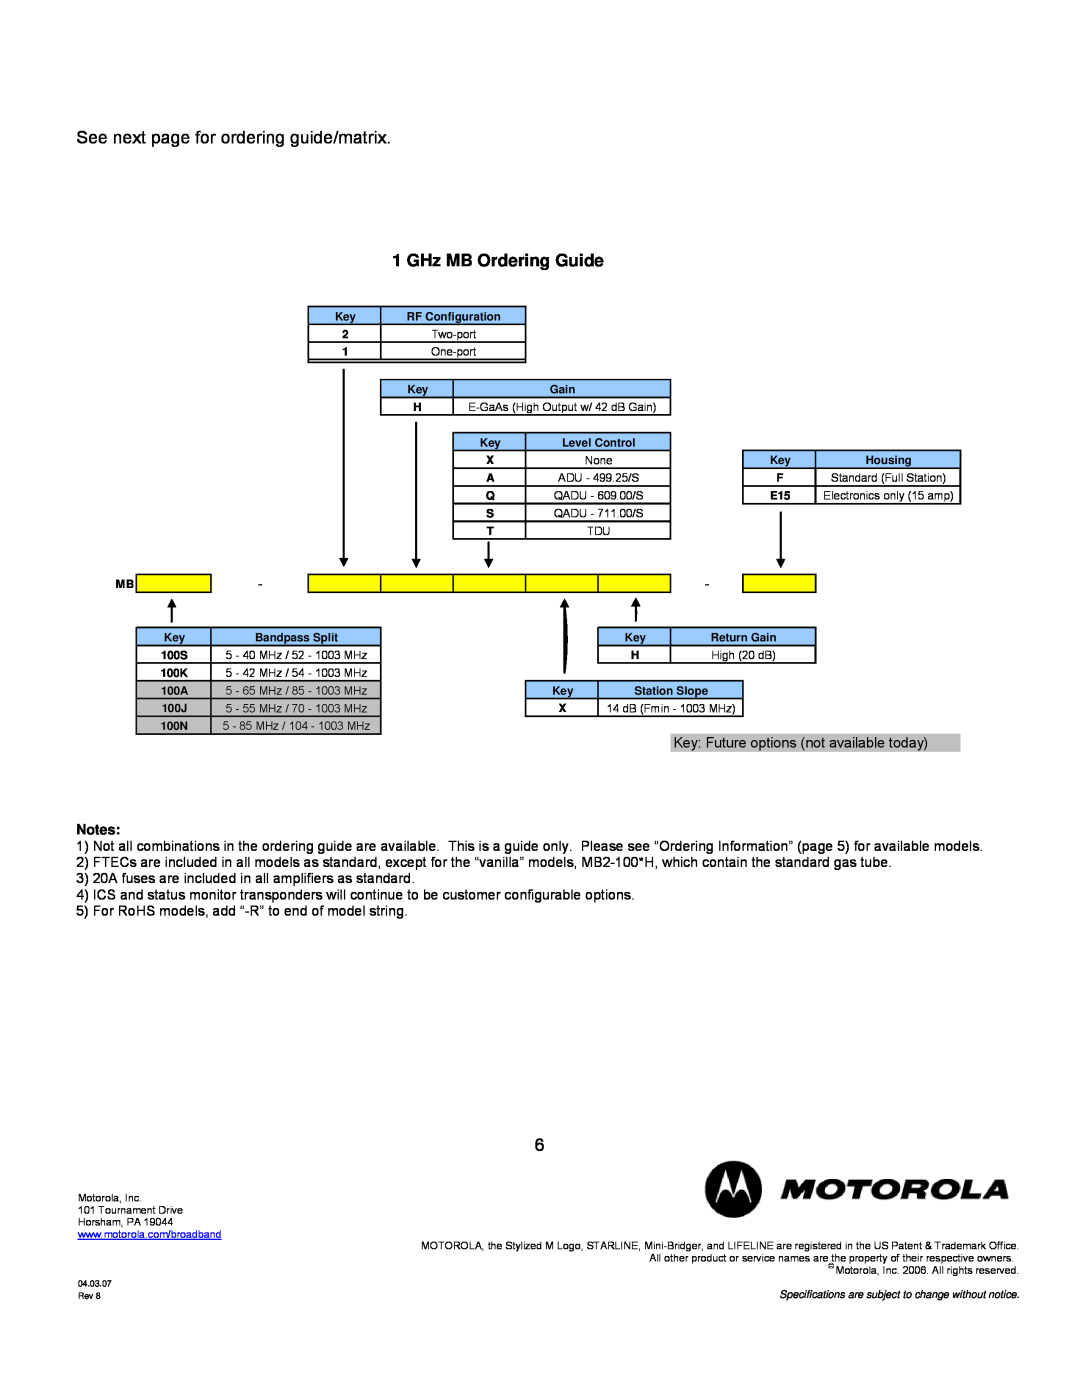 Motorola MB100 specifications GHz MB Ordering Guide, See next page for ordering guide/matrix 